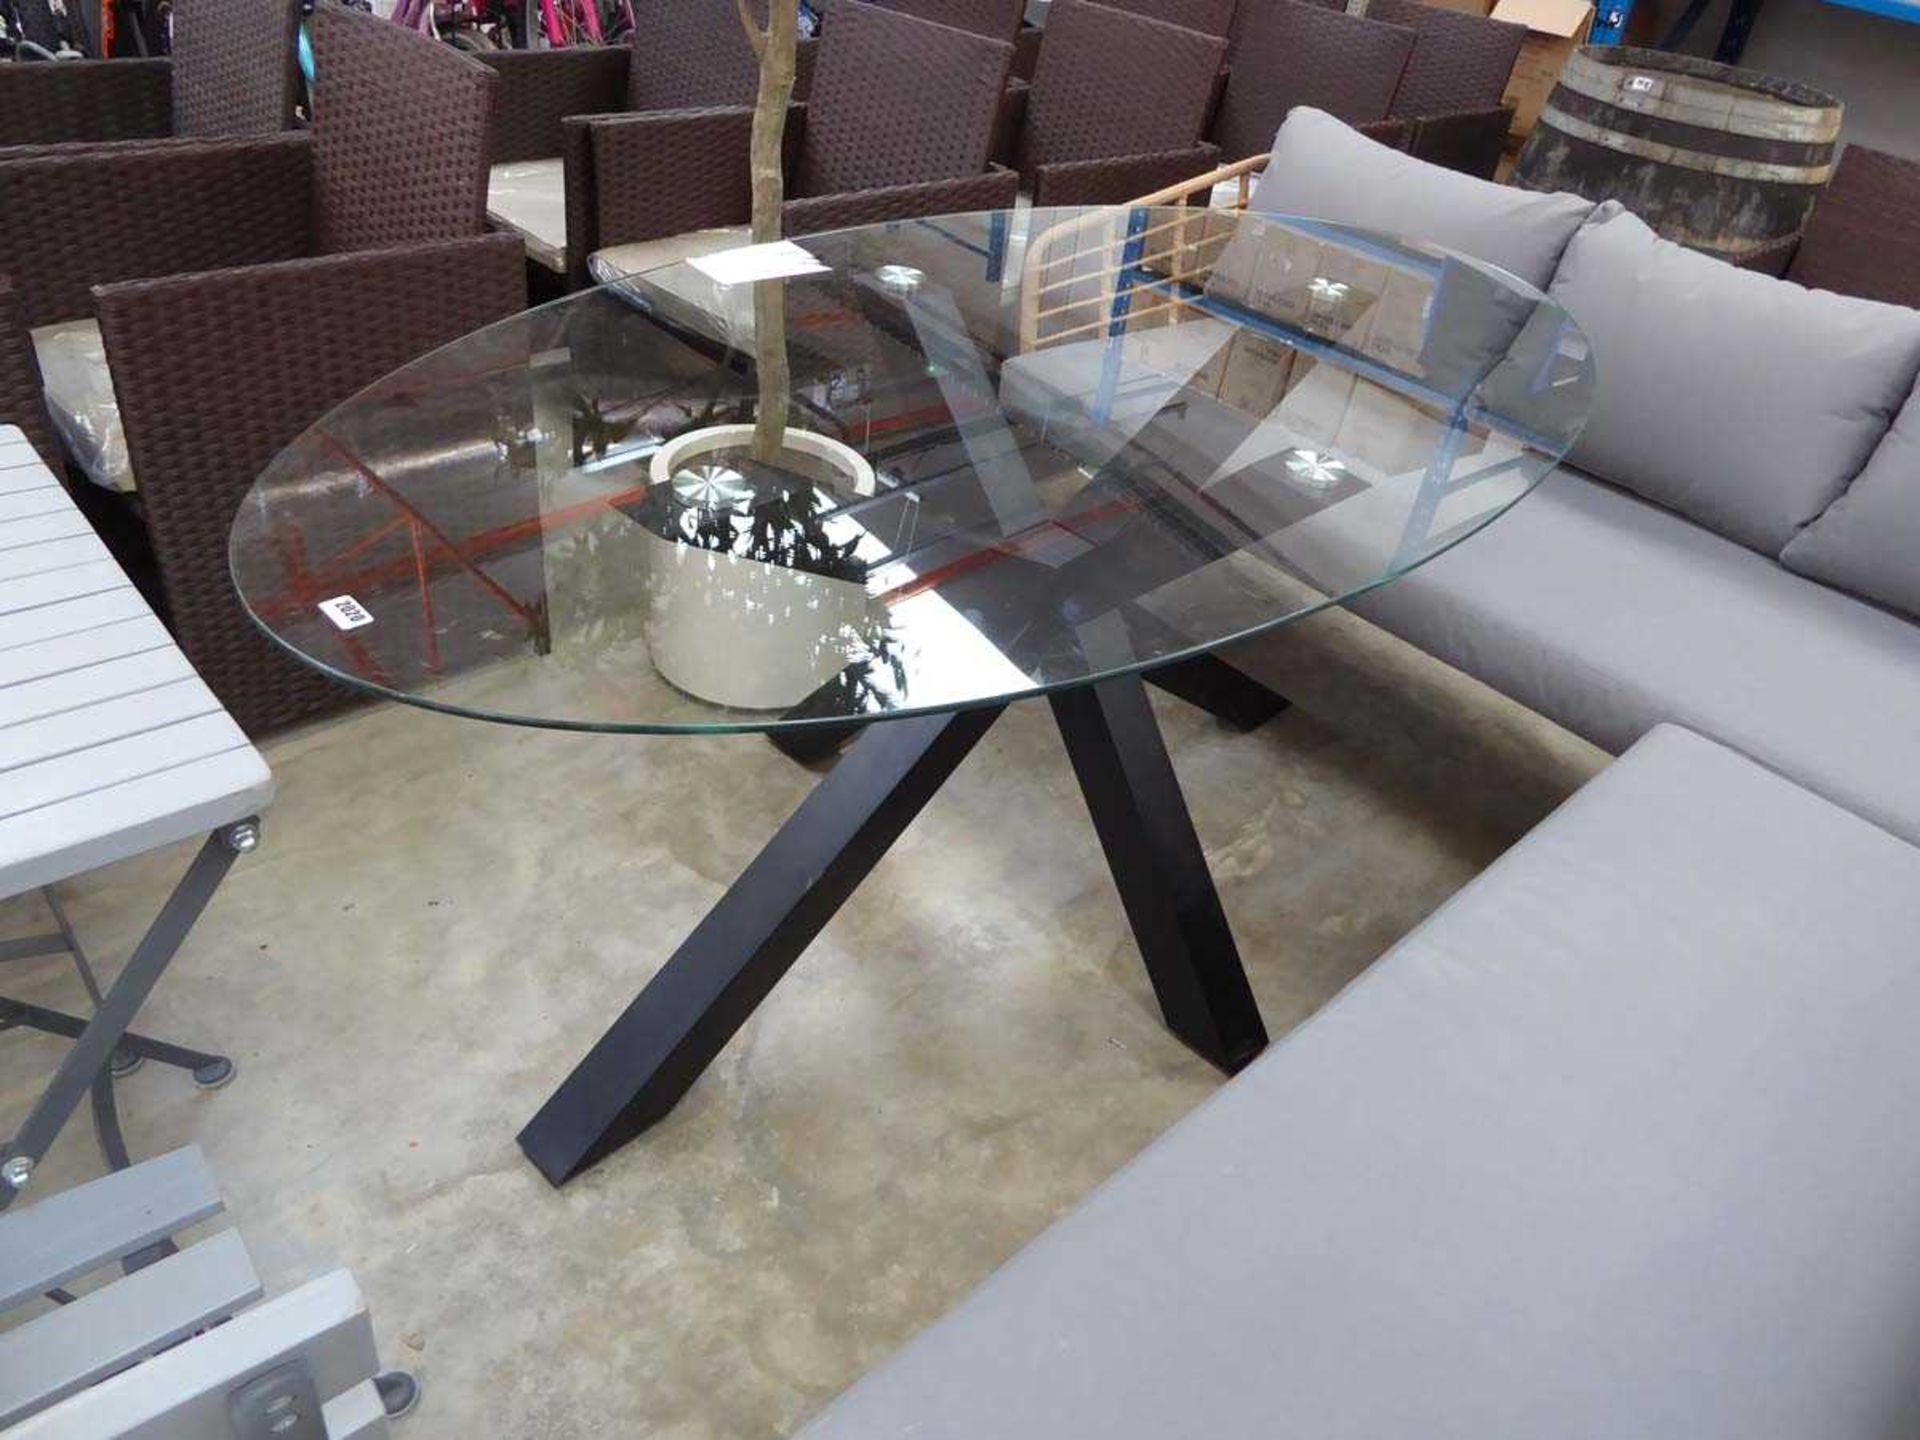 Oval glass topped dining table on black crisscross support